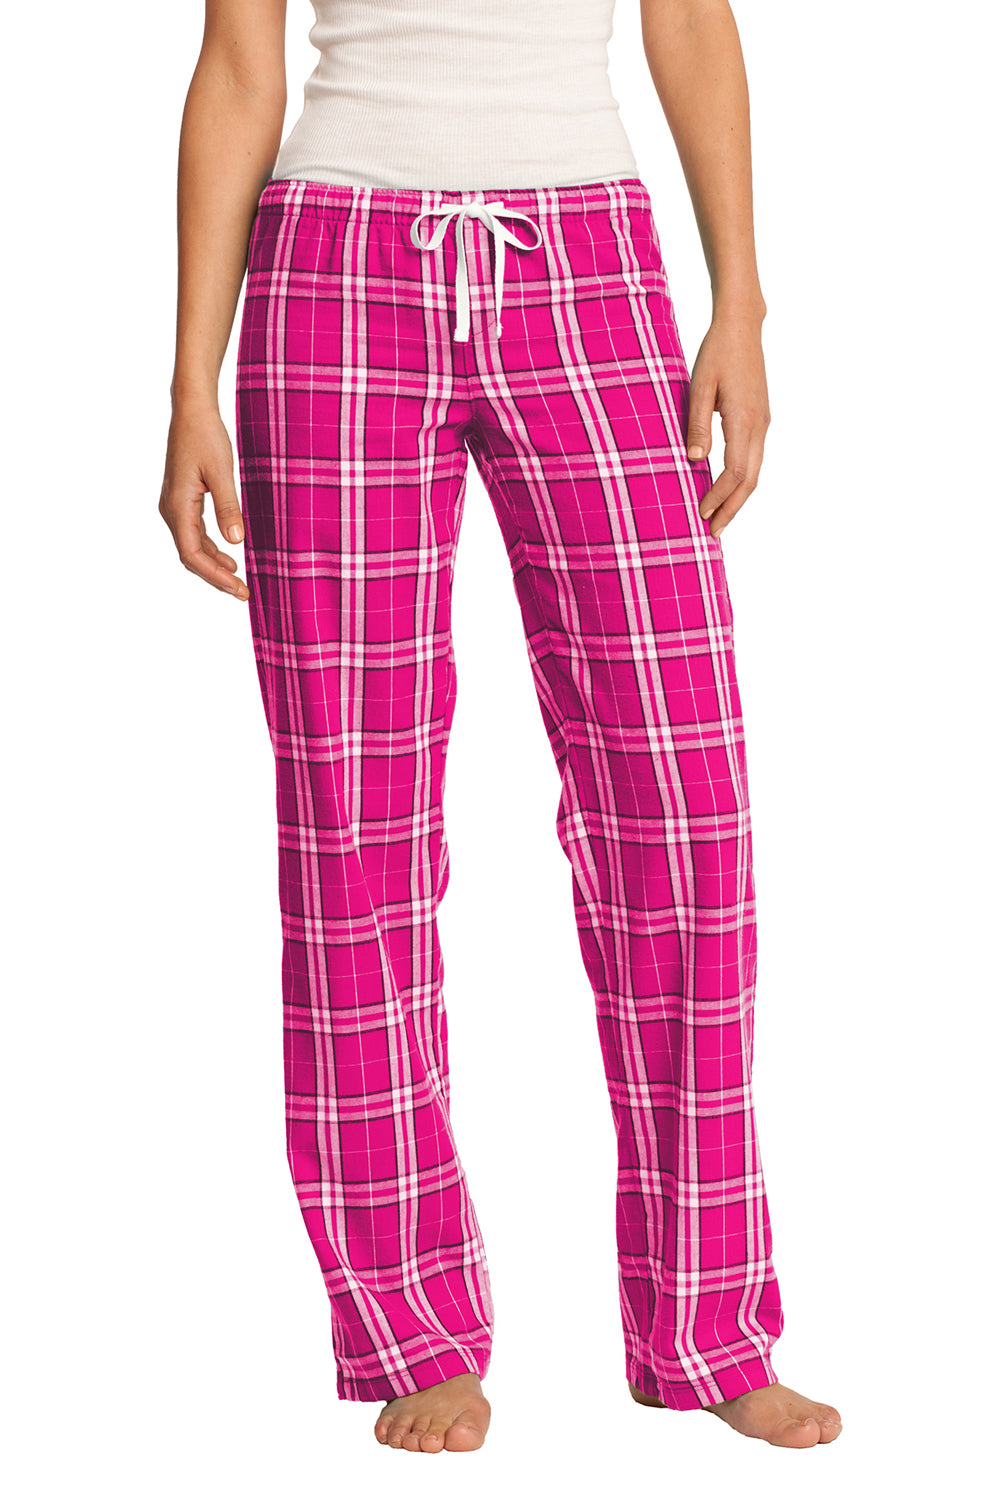 District DT2800 Womens Flannel Plaid Lounge Pants Fuchsia Pink Front